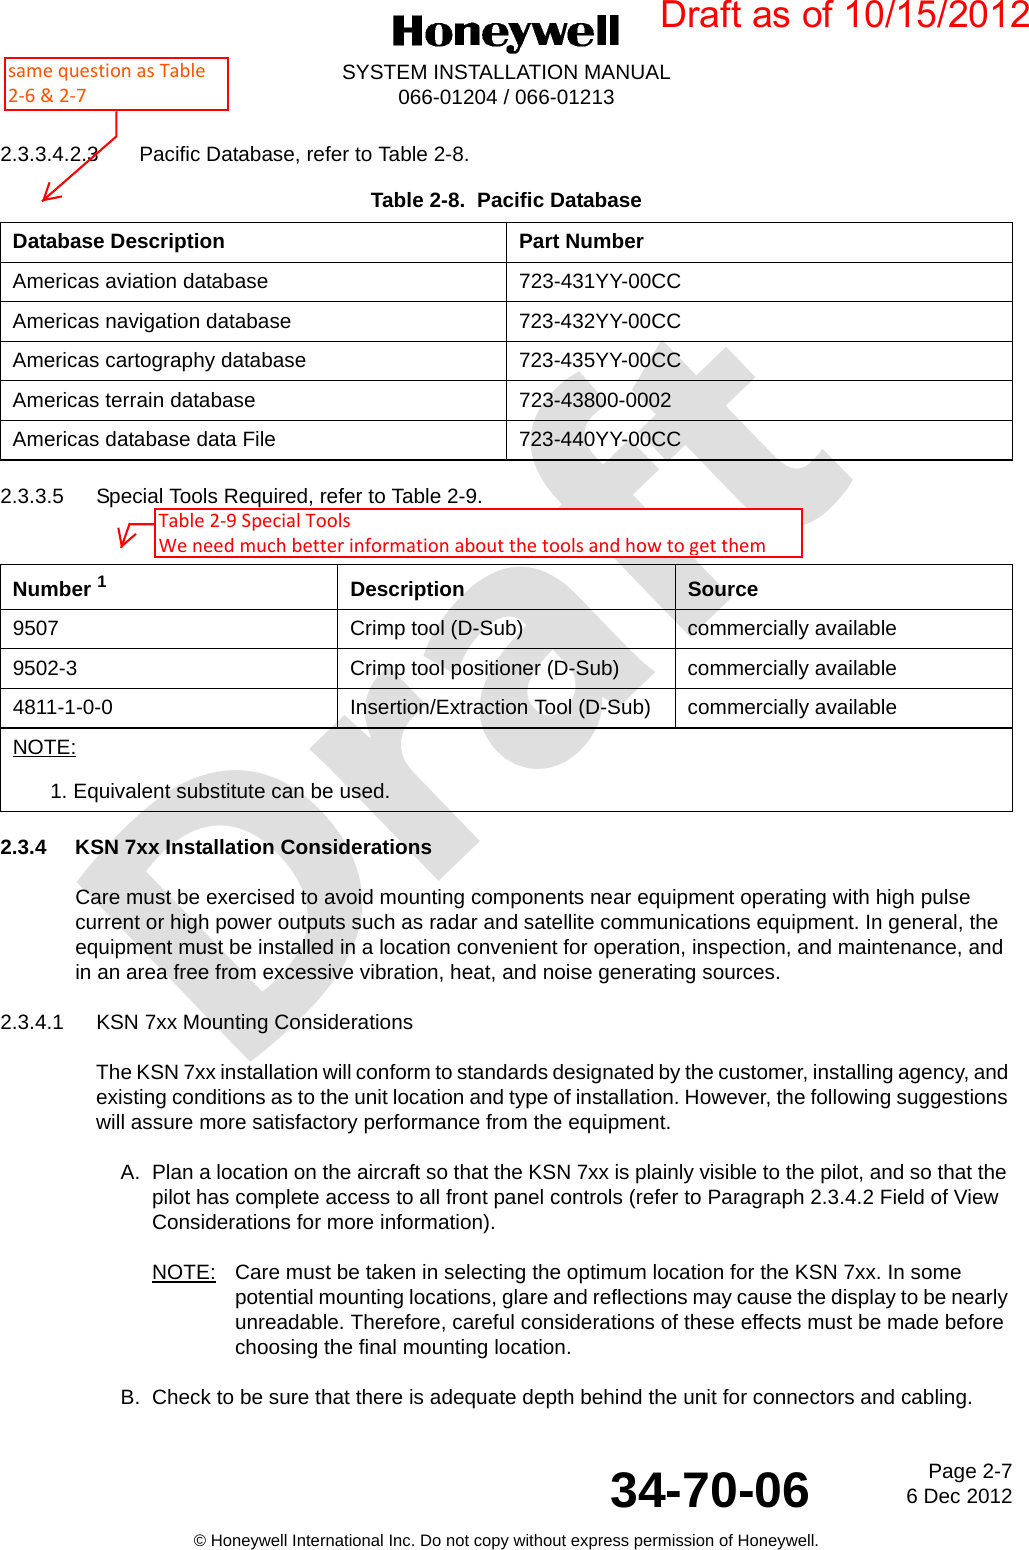 DraftPage 2-76 Dec 201234-70-06SYSTEM INSTALLATION MANUAL066-01204 / 066-01213© Honeywell International Inc. Do not copy without express permission of Honeywell.2.3.3.4.2.3 Pacific Database, refer to Table 2-8.2.3.3.5 Special Tools Required, refer to Table 2-9.2.3.4 KSN 7xx Installation ConsiderationsCare must be exercised to avoid mounting components near equipment operating with high pulse current or high power outputs such as radar and satellite communications equipment. In general, the equipment must be installed in a location convenient for operation, inspection, and maintenance, and in an area free from excessive vibration, heat, and noise generating sources.2.3.4.1 KSN 7xx Mounting ConsiderationsThe KSN 7xx installation will conform to standards designated by the customer, installing agency, and existing conditions as to the unit location and type of installation. However, the following suggestions will assure more satisfactory performance from the equipment.A. Plan a location on the aircraft so that the KSN 7xx is plainly visible to the pilot, and so that the pilot has complete access to all front panel controls (refer to Paragraph 2.3.4.2 Field of View Considerations for more information).NOTE: Care must be taken in selecting the optimum location for the KSN 7xx. In some potential mounting locations, glare and reflections may cause the display to be nearly unreadable. Therefore, careful considerations of these effects must be made before choosing the final mounting location.B. Check to be sure that there is adequate depth behind the unit for connectors and cabling.Table 2-8.  Pacific DatabaseDatabase Description Part NumberAmericas aviation database 723-431YY-00CCAmericas navigation database 723-432YY-00CCAmericas cartography database 723-435YY-00CCAmericas terrain database 723-43800-0002Americas database data File 723-440YY-00CCTable 2-9.  Special Tools Required Number 1Description Source9507 Crimp tool (D-Sub) commercially available9502-3 Crimp tool positioner (D-Sub) commercially available4811-1-0-0 Insertion/Extraction Tool (D-Sub) commercially availableNOTE:1. Equivalent substitute can be used.Draft as of 10/15/2012same question as Table 2-6 &amp; 2-7Table 2-9 Special Tools We need much better information about the tools and how to get them 